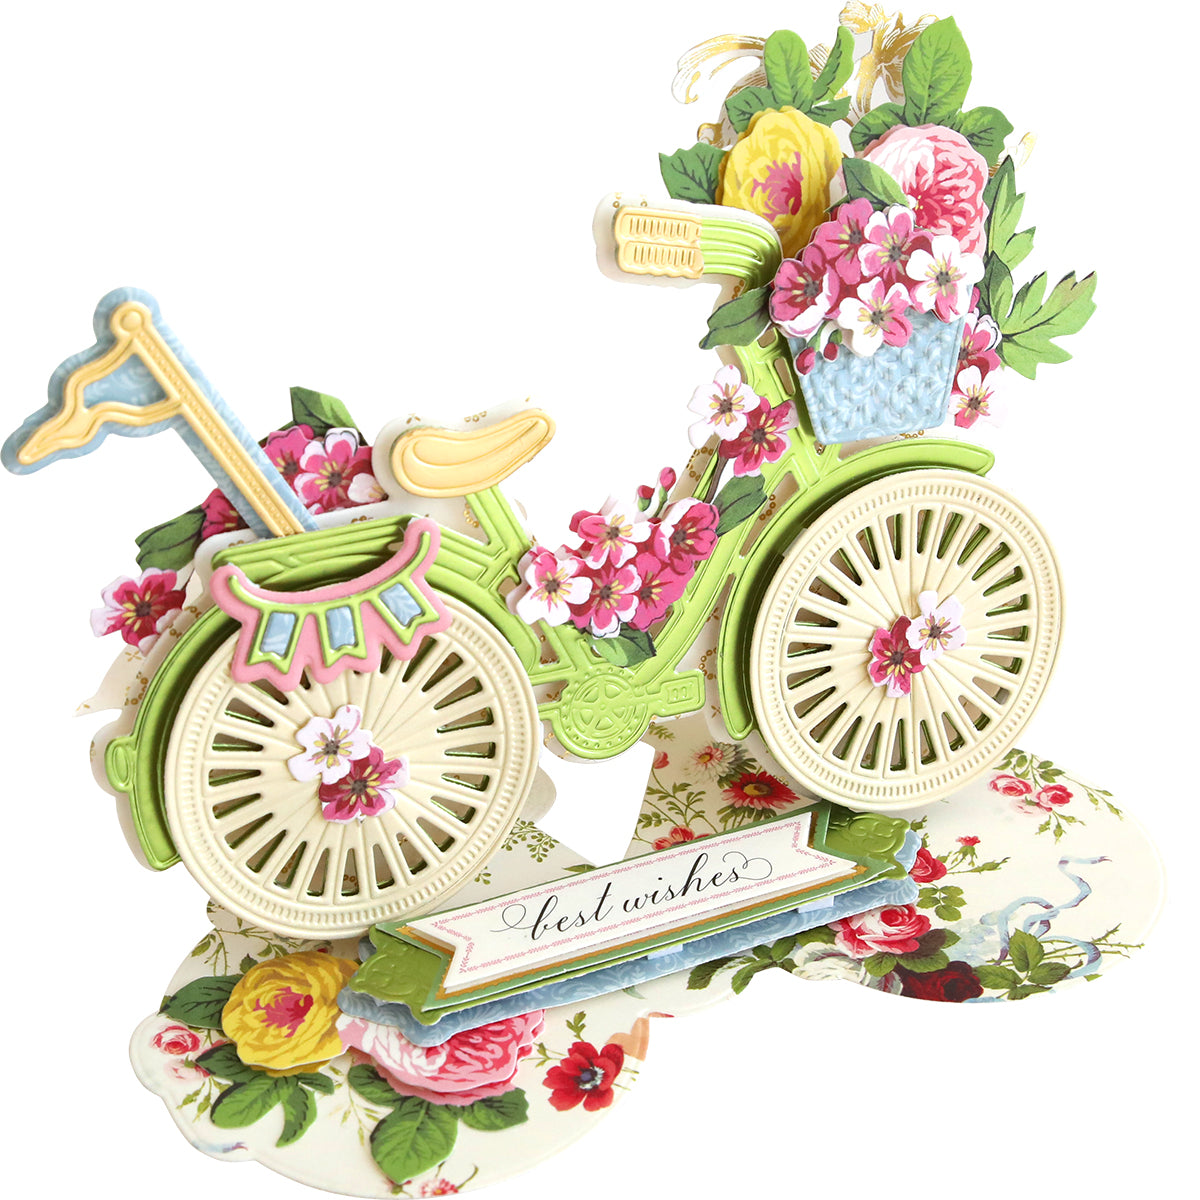 A three-dimensional greeting card featuring a whimsical representation of a 3D Bicycle Easel Die adorned with colorful flowers and embellishments, along with a "best wishes" banner.